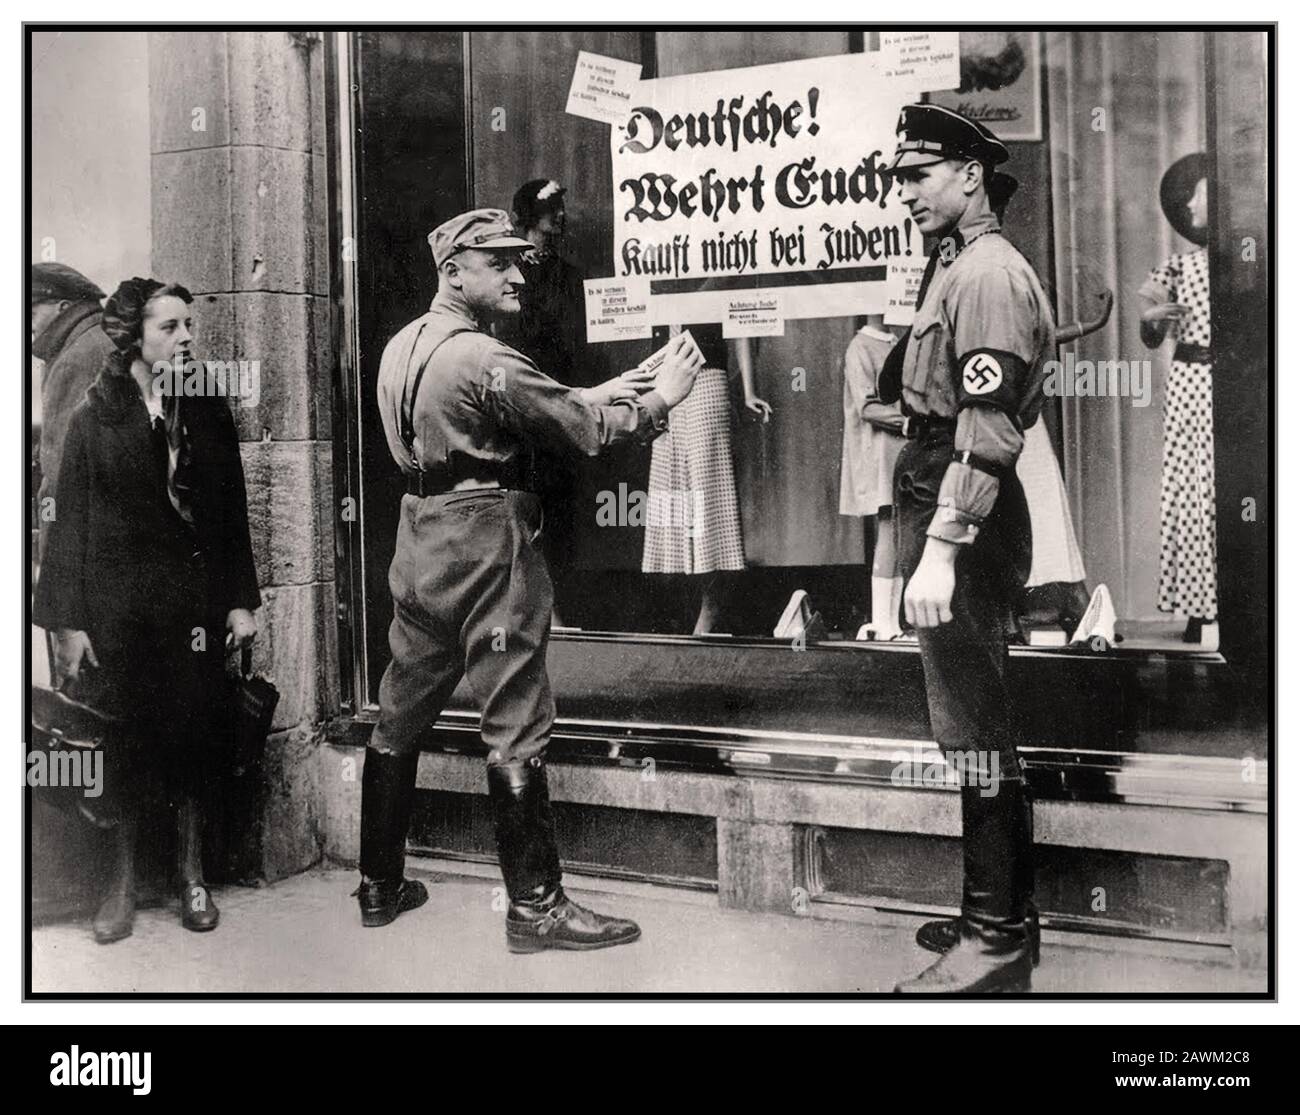 Anti Jewish boycott 1930s Germany Nazi slogans April 1st 1933 produced by German SA paramilitary groups - who stood outside Jewish shops, law firms and doctors' offices. The signs brought along by the brownshirts read: 'Germans! Defend yourselves! Don't buy from Jews!' This was actioned by racist Nazi thugs, emboldened by their official uniformed status, enjoying their dominance over the Jewish population.  The Nazi government organised this one-day boycott of all Jewish-owned businesses in Germany, with assistance of Julius Streicher, publisher of anti-Semitic newspaper Der Sturmer. Stock Photo